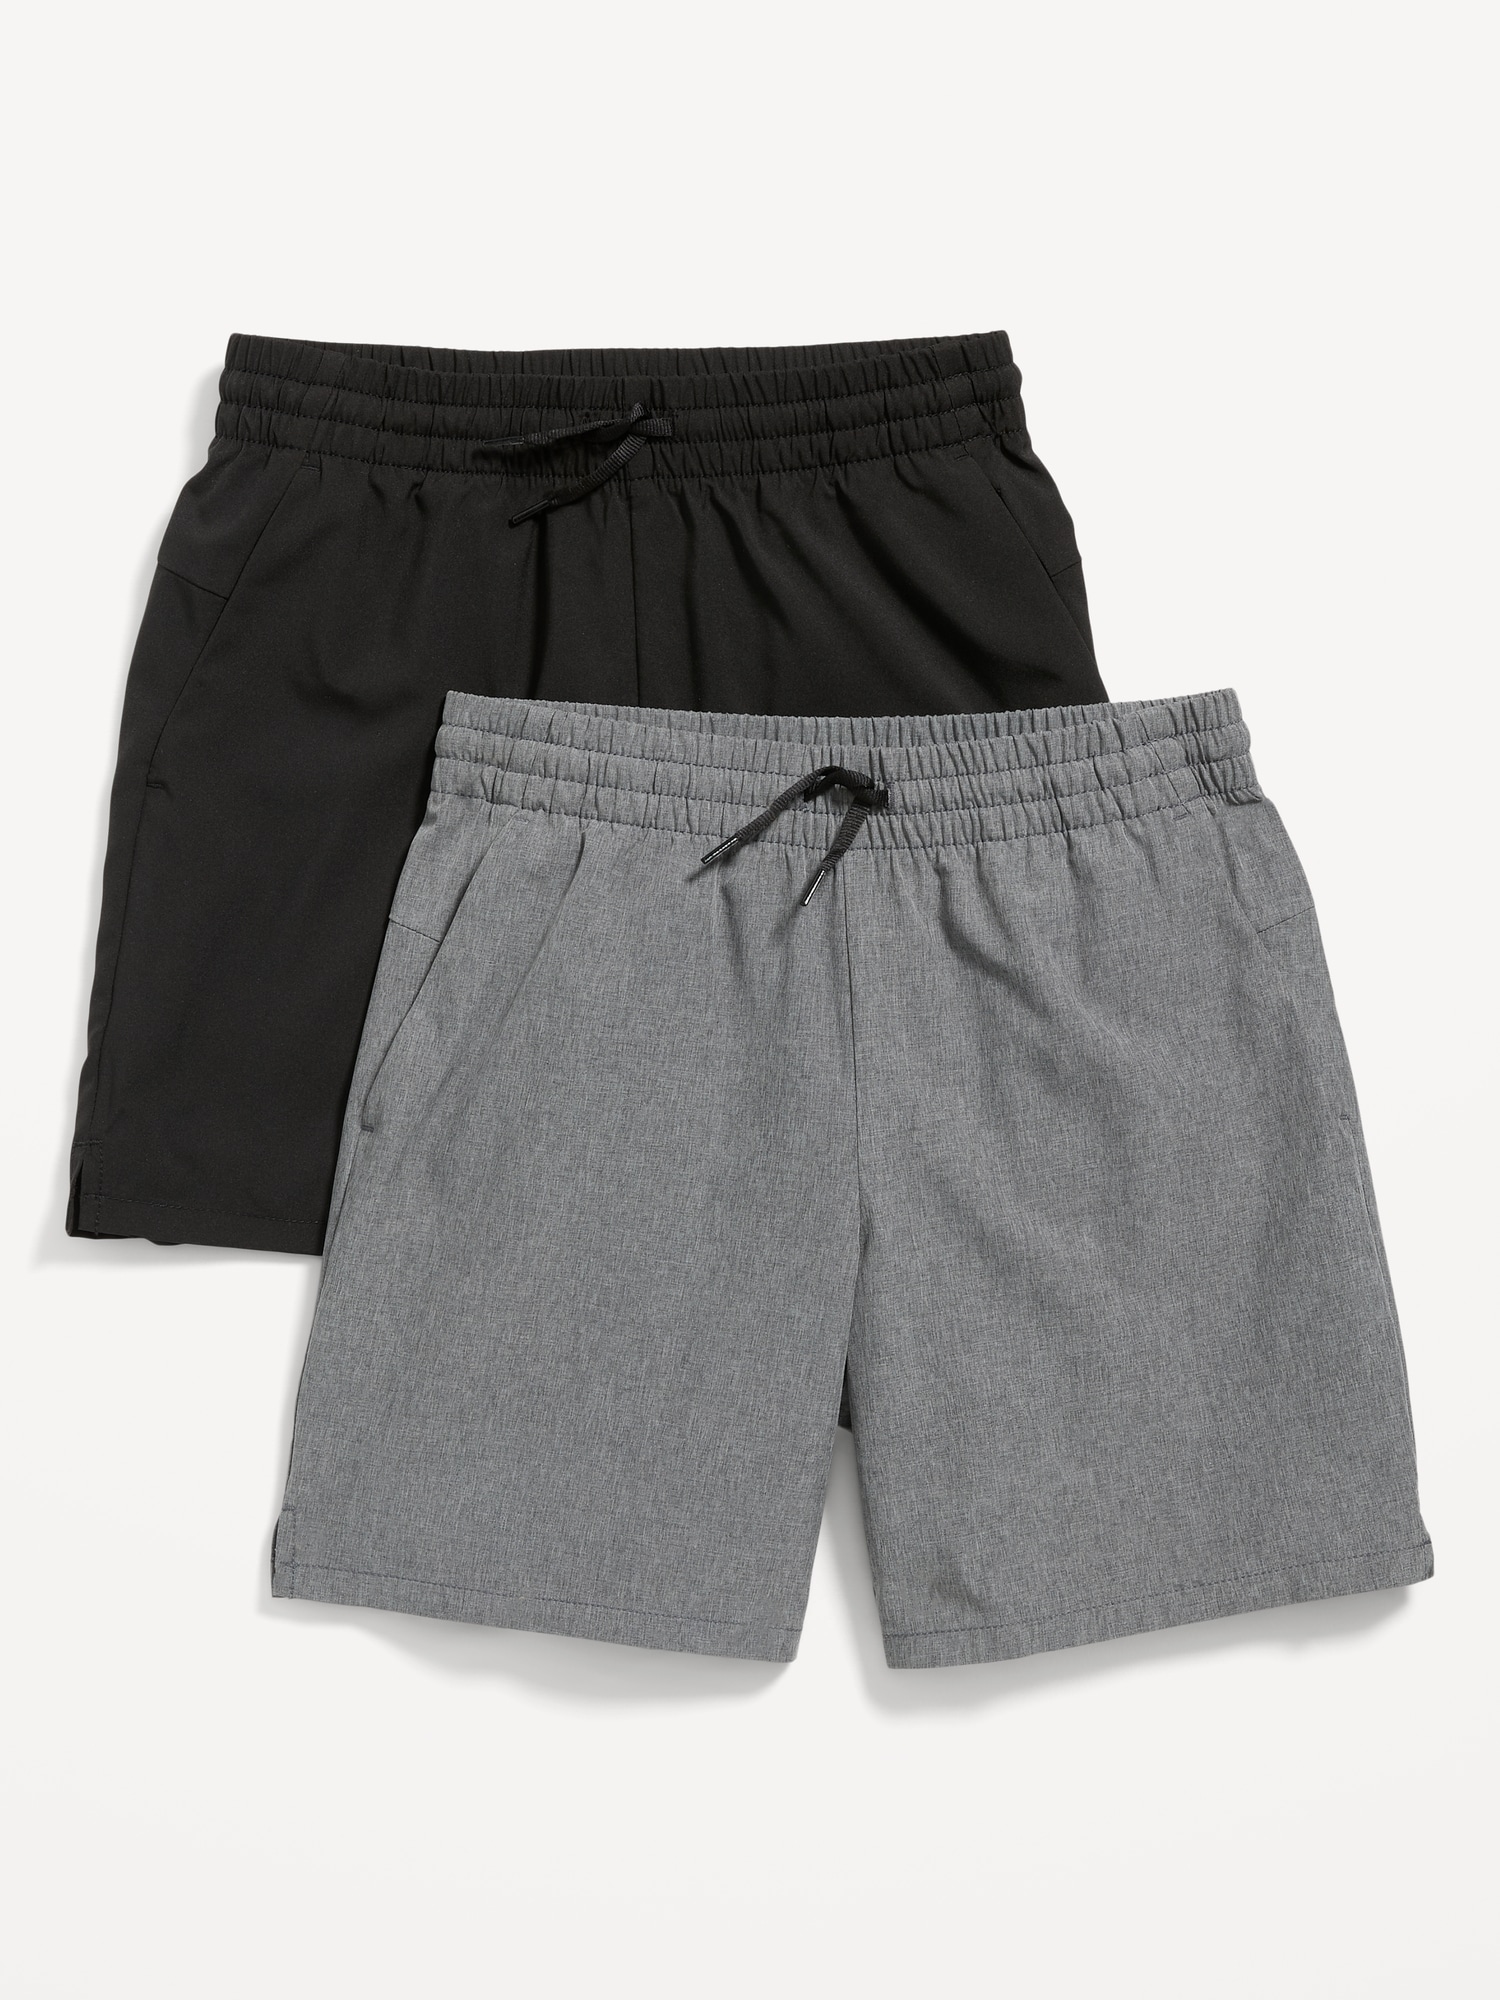 Old Navy StretchTech Performance Jogger Shorts 2-Pack for Boys (Above Knee) black. 1